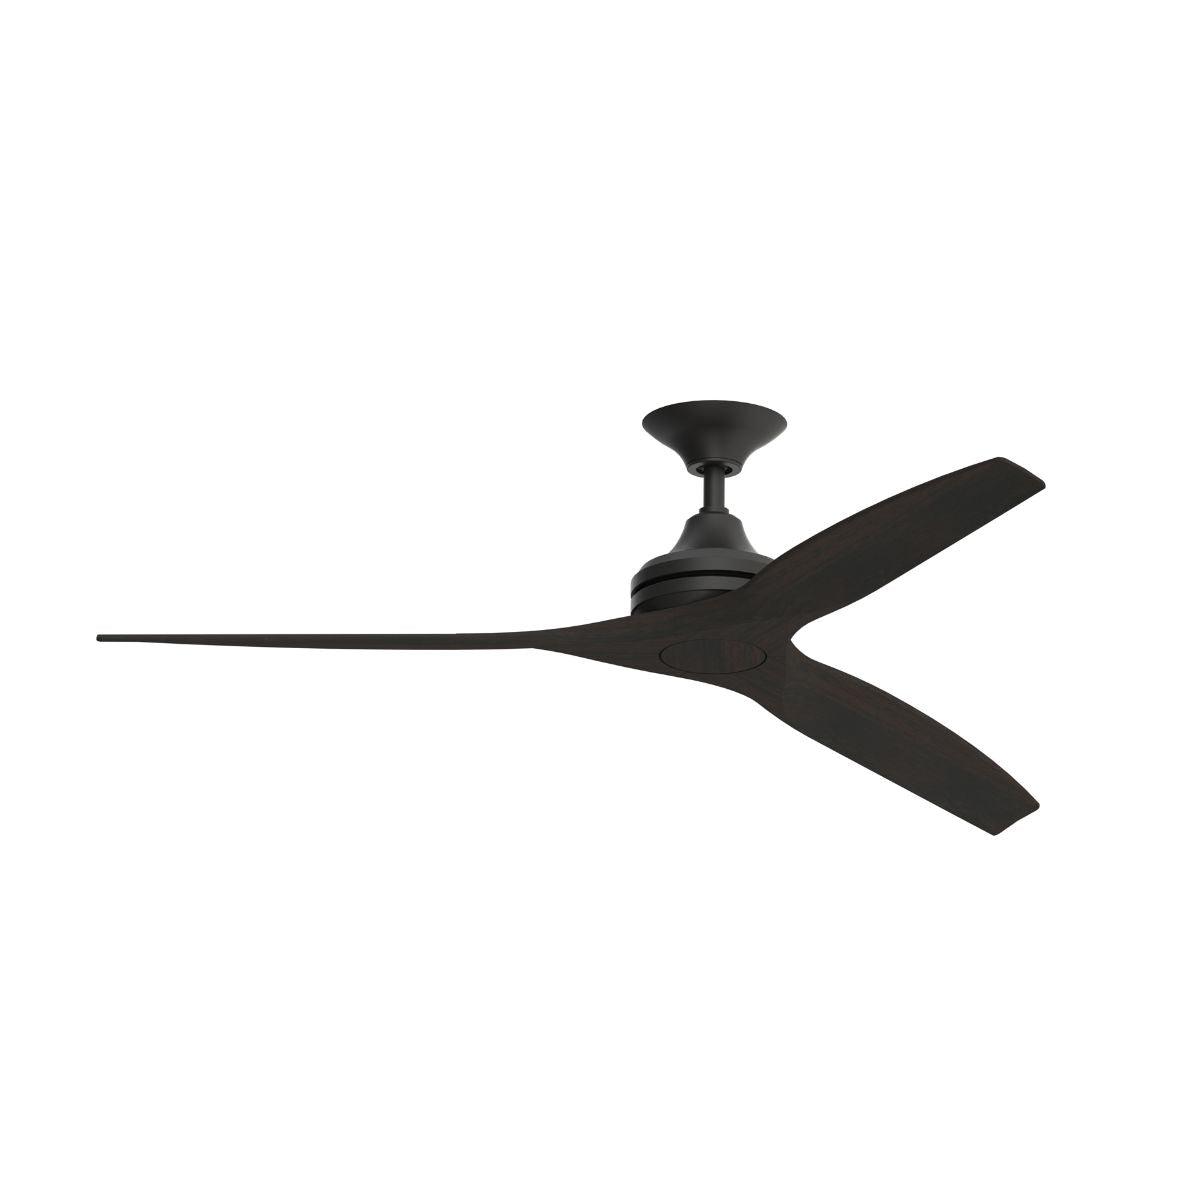 Spitfire Outdoor Ceiling Fan Motor With Remote, Set of 3 Blades Sold Separately